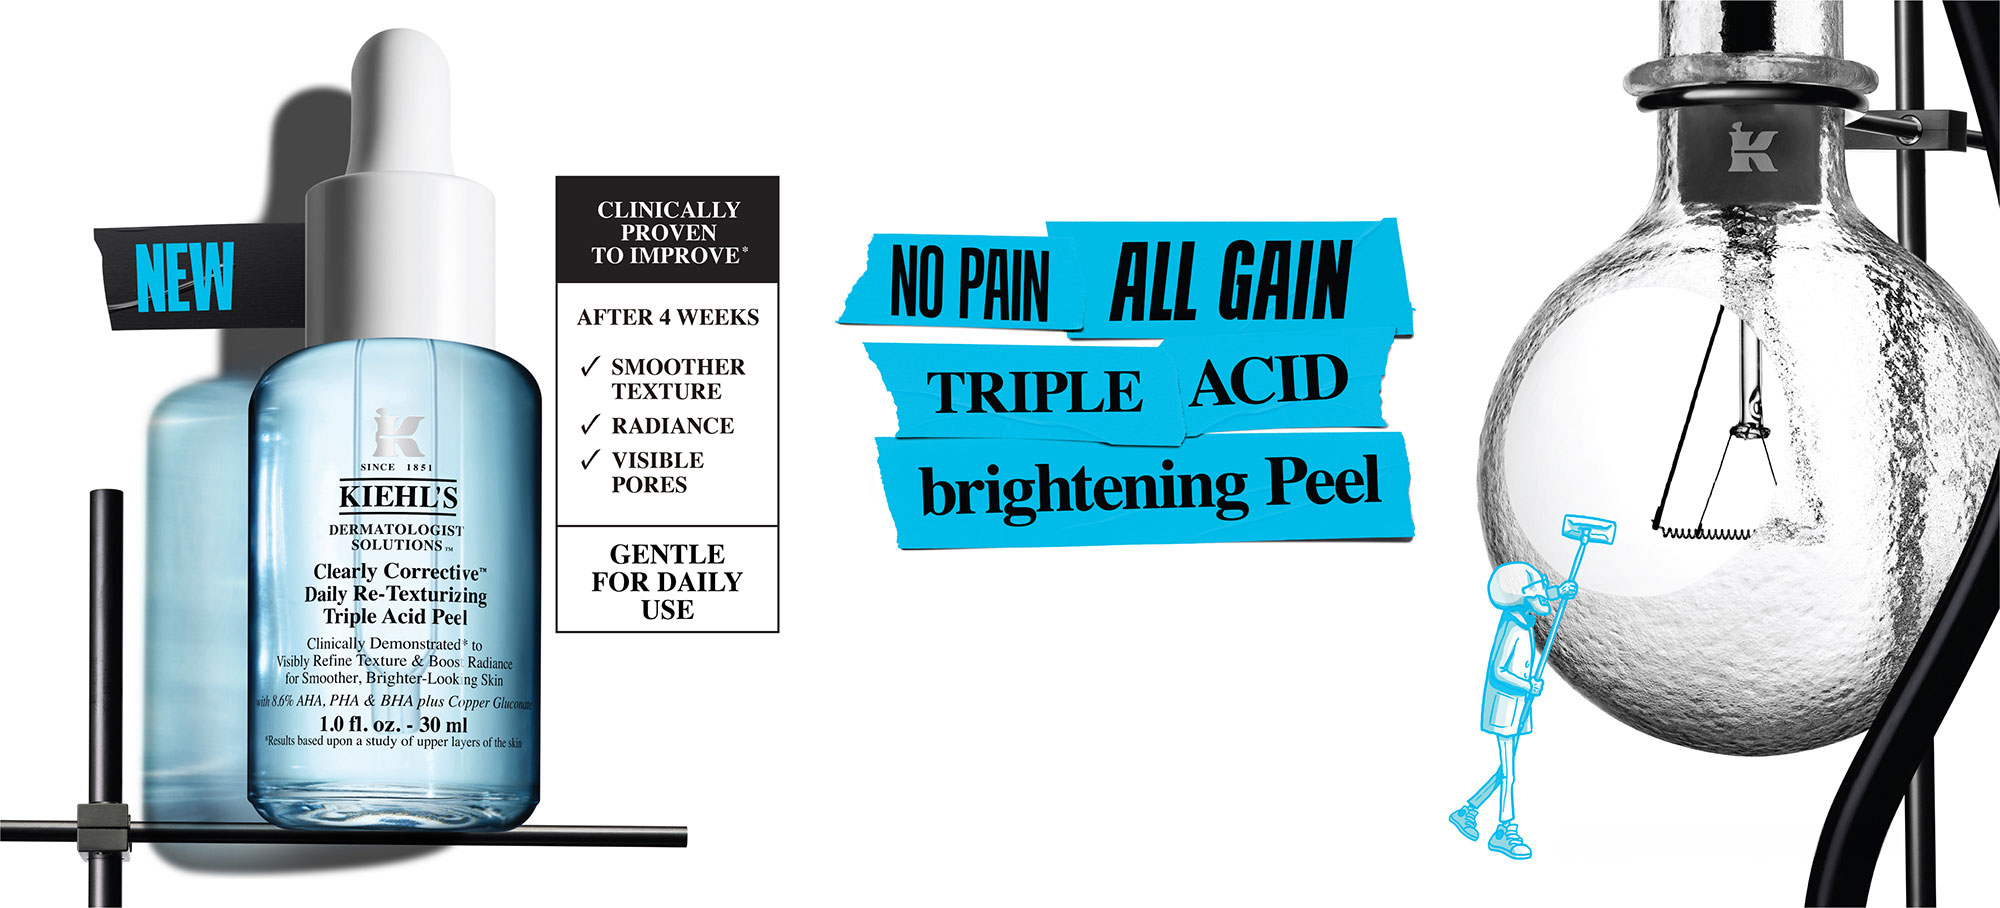 CLEARLY CORRECTIVE™ TRIPLE ACID PEEL - Clinically proven to smoother texture